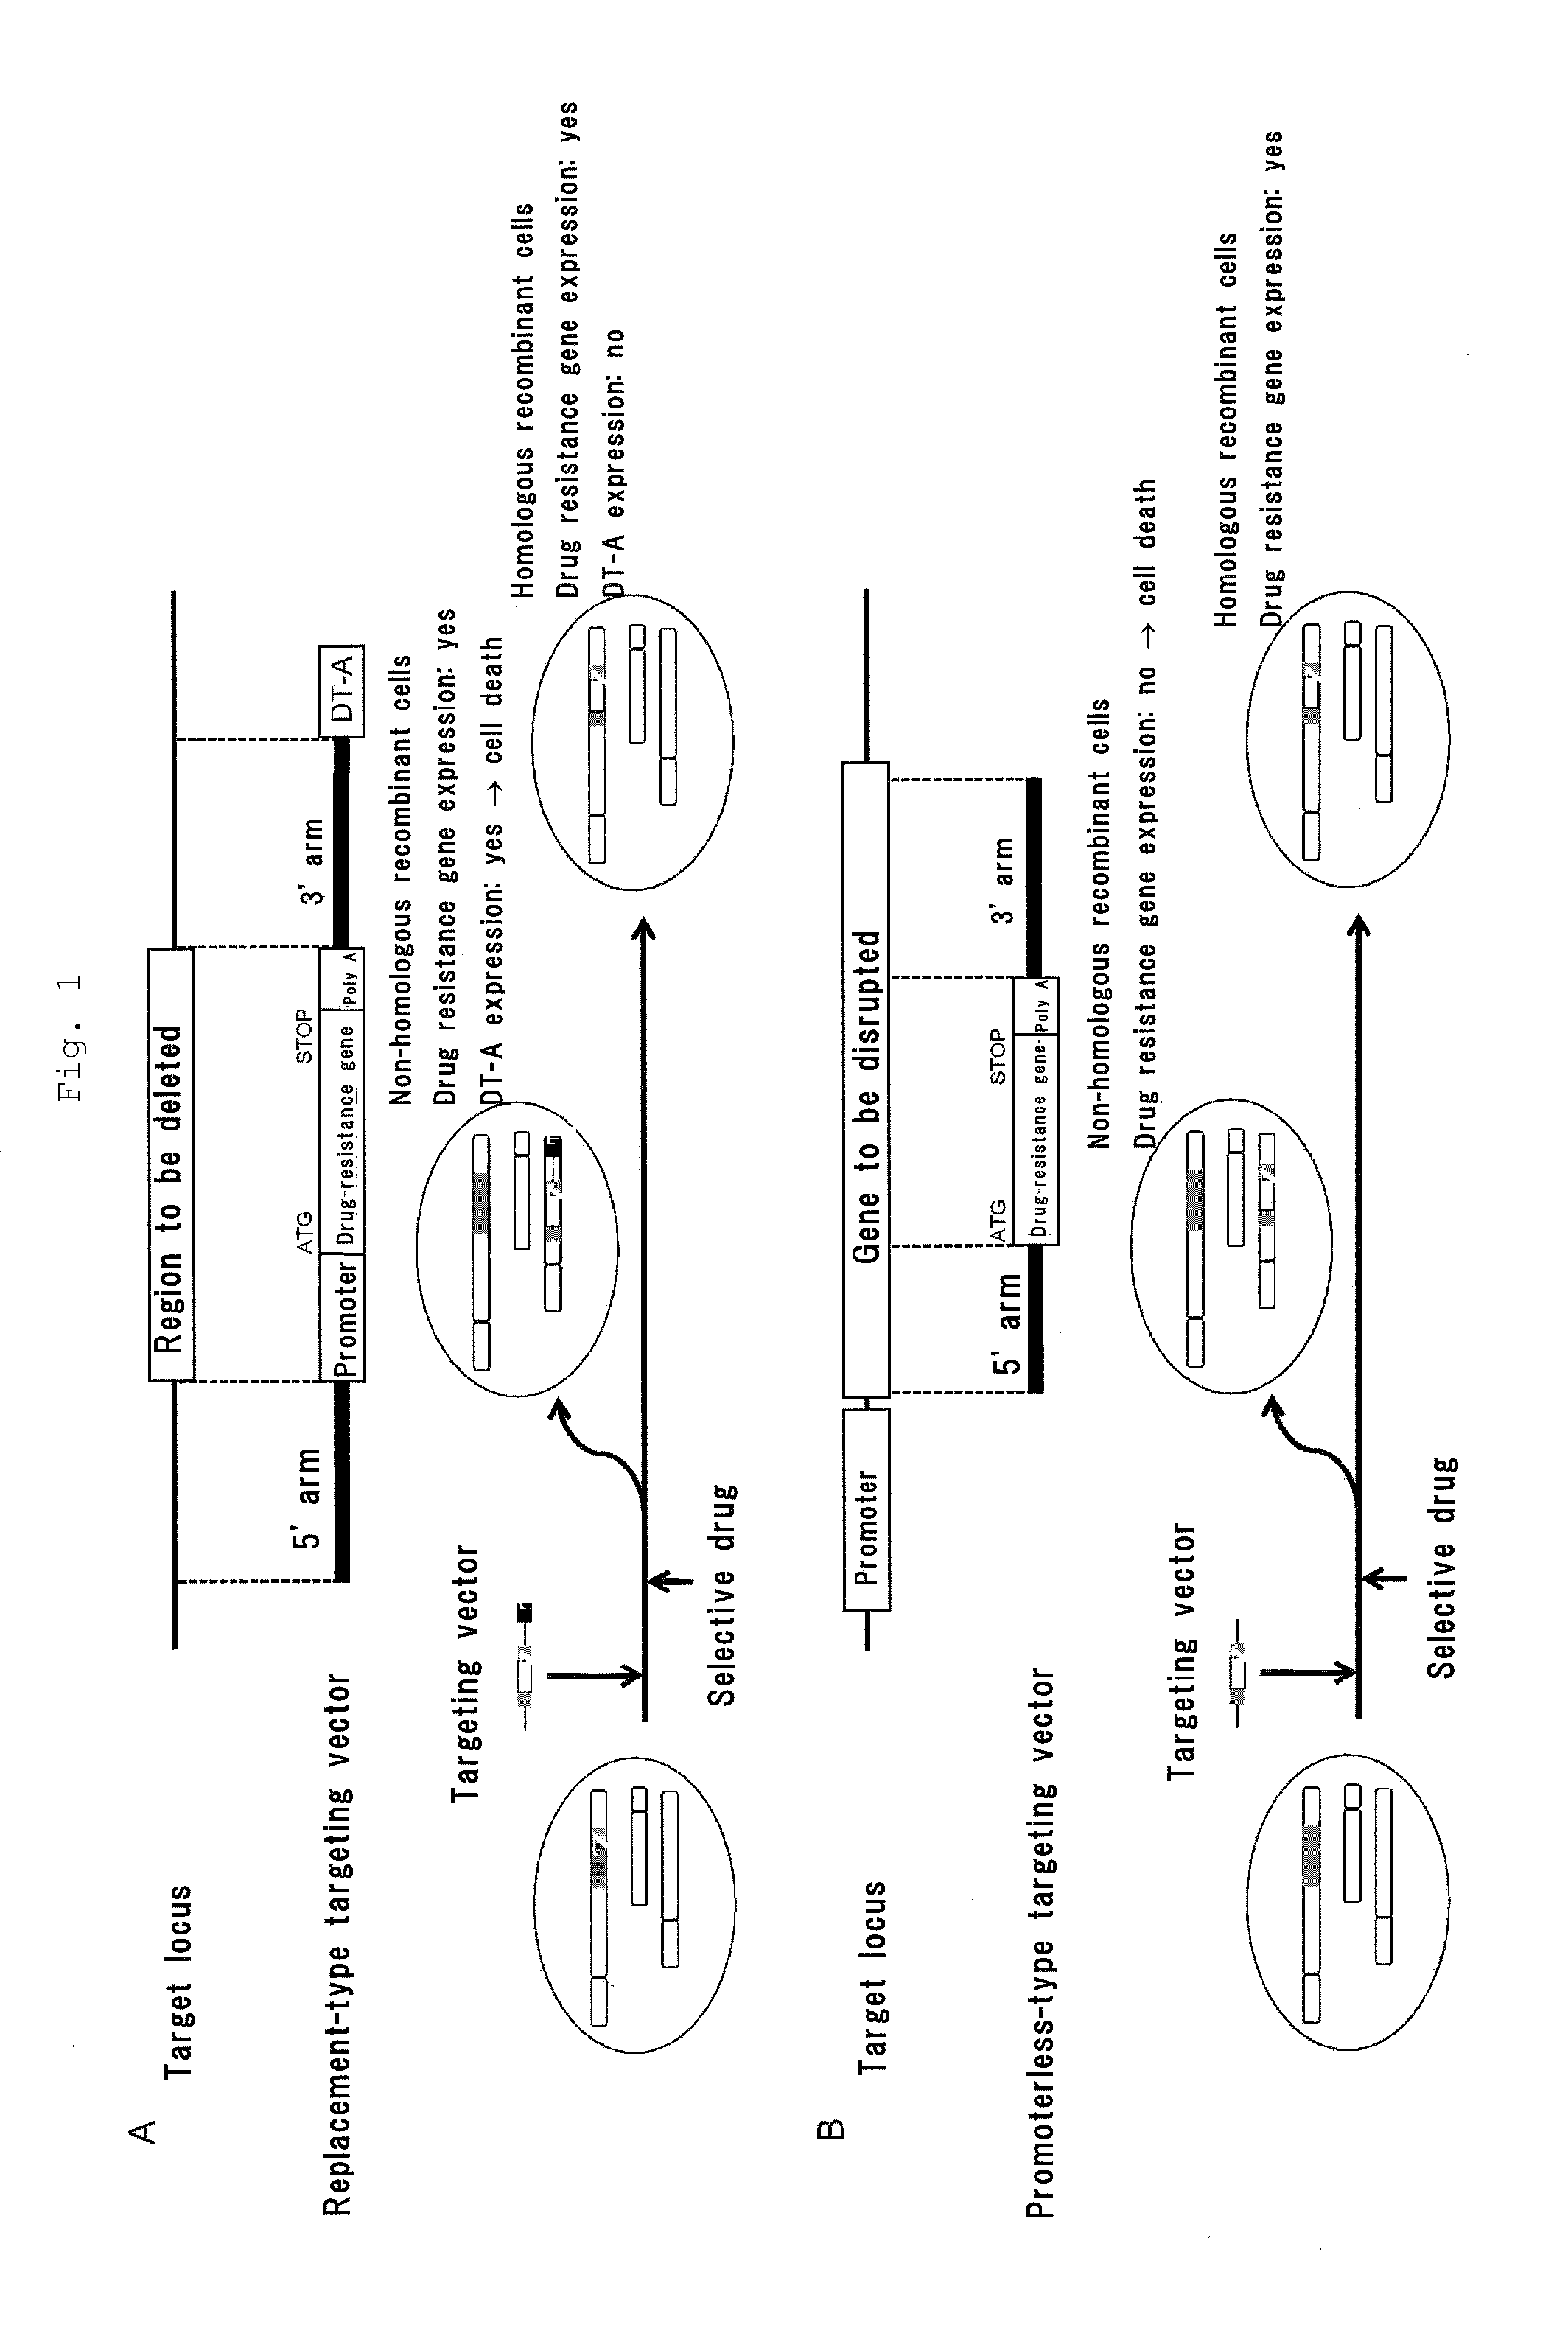 Gene targeting vector, method for manufacturing same, and method for using same